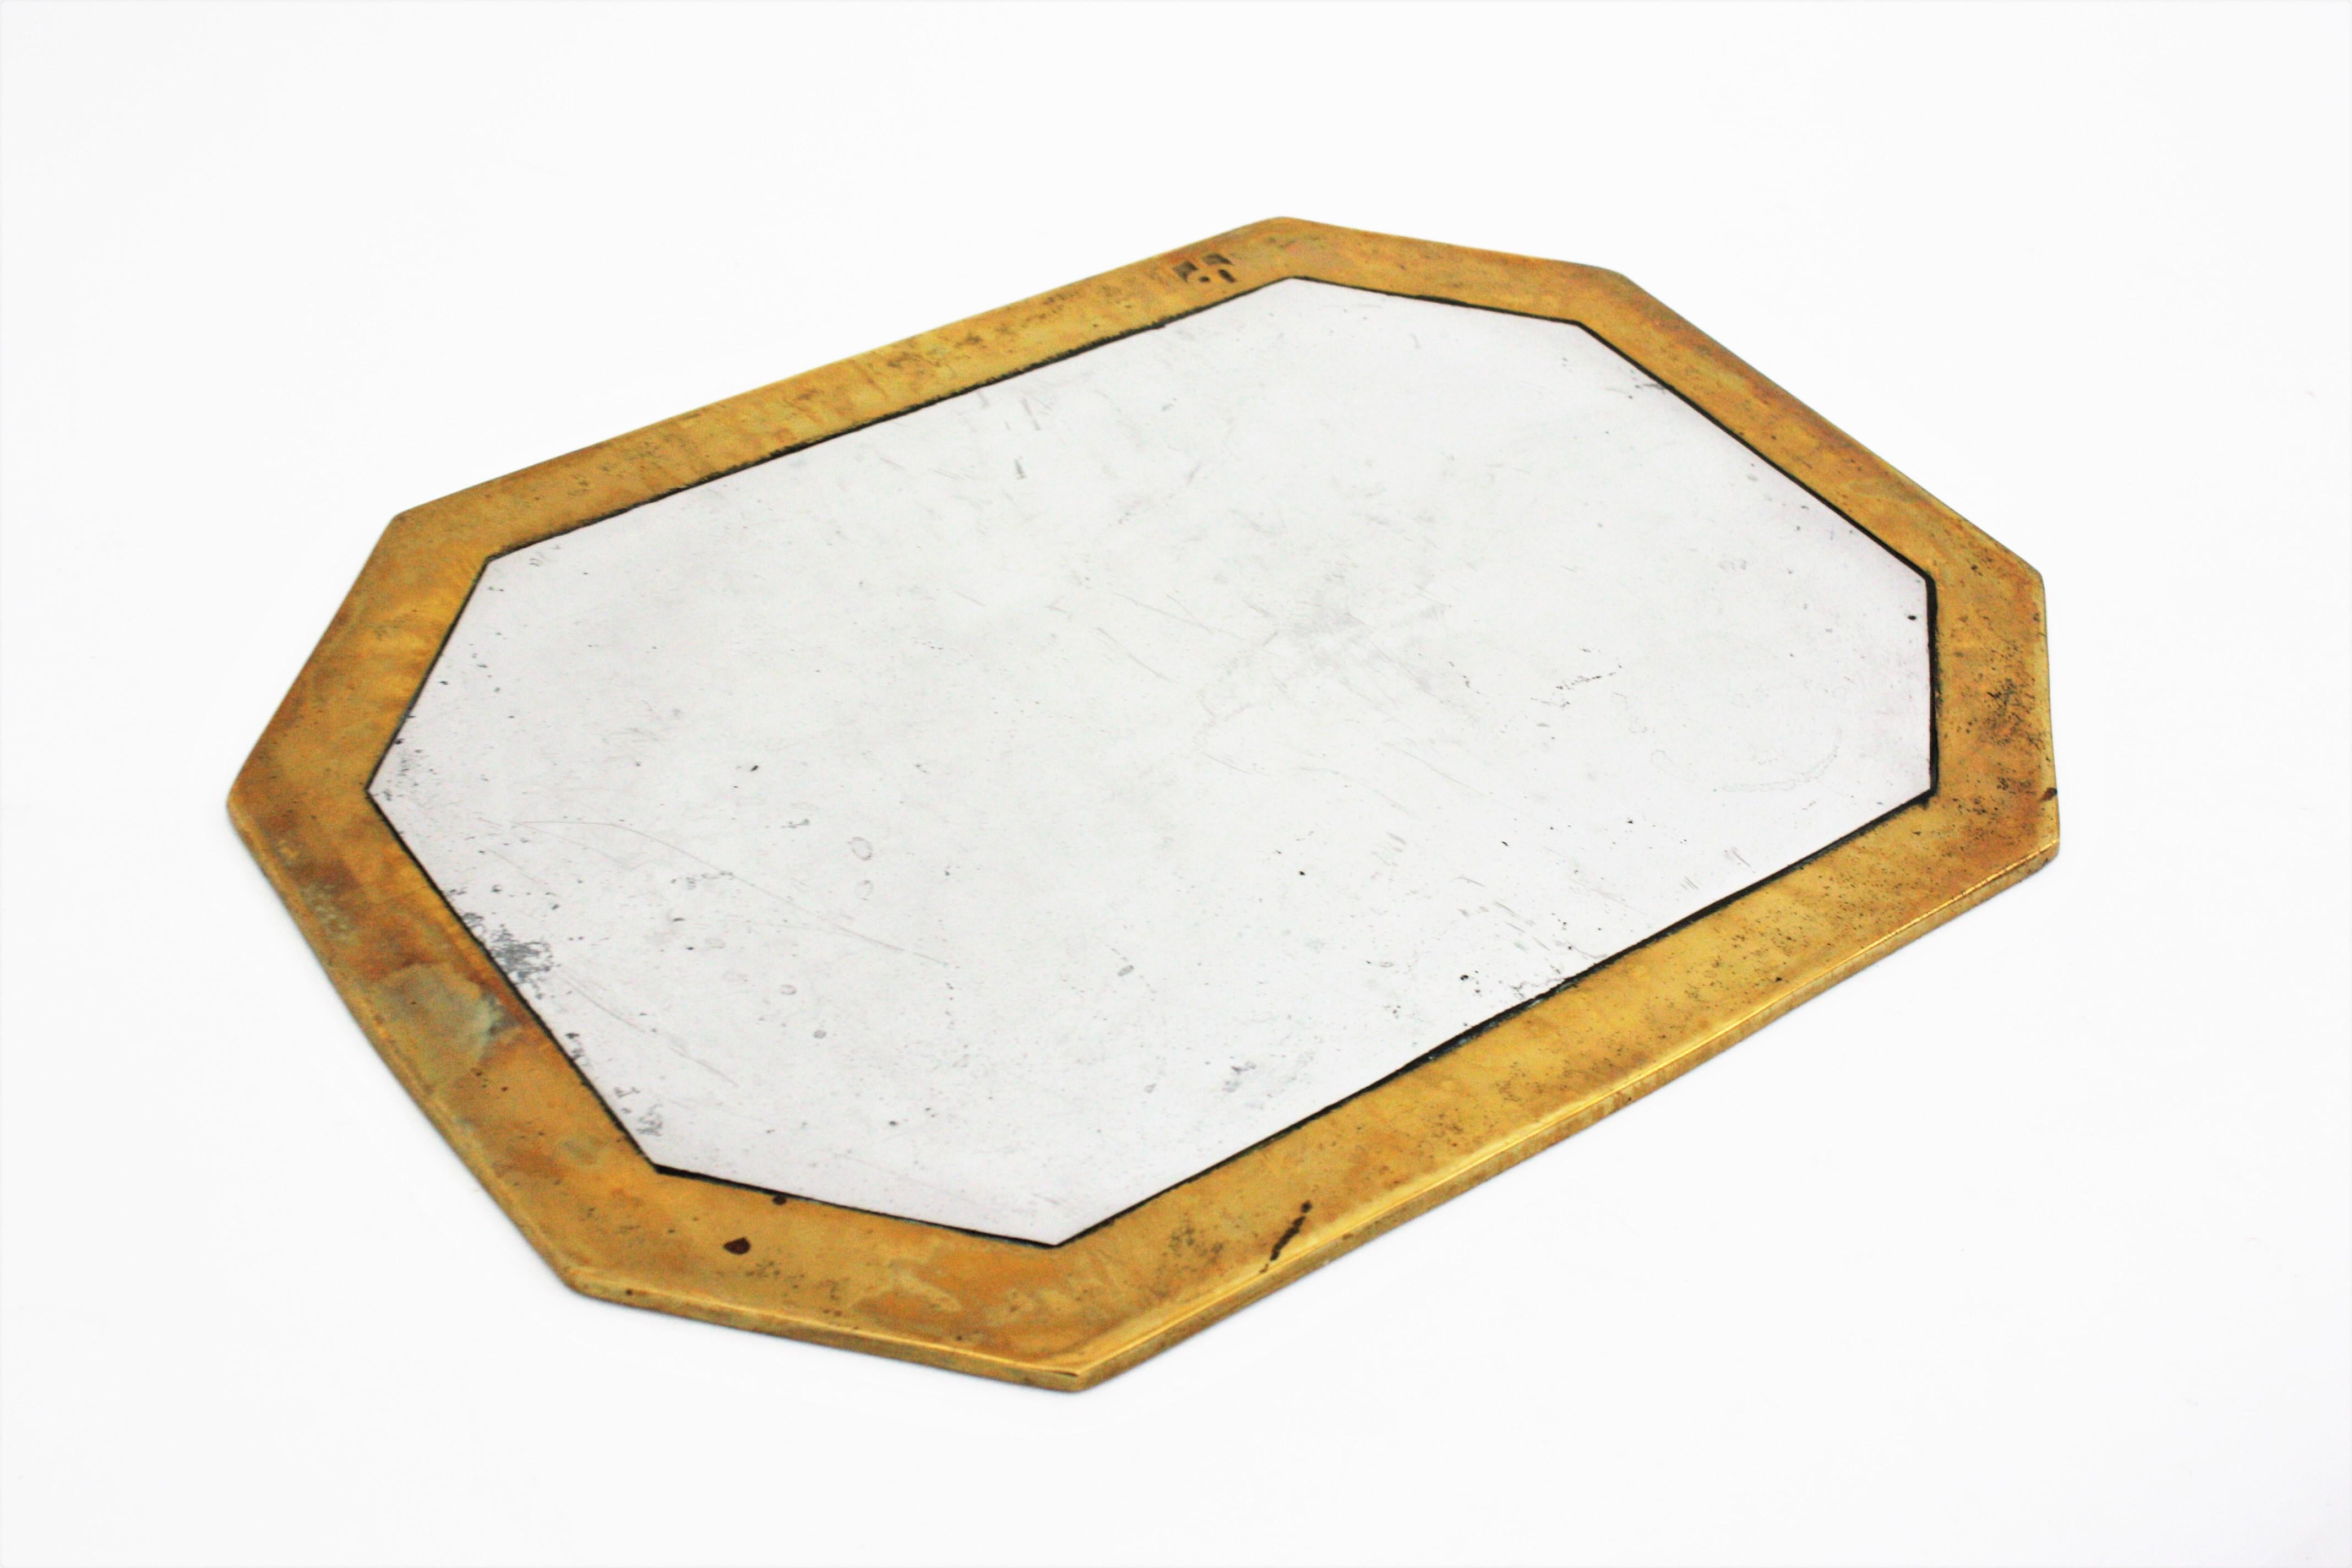 David Marshall Brutalist Octagonal Tray or Table Coaster, Spain, 1980s For Sale 2